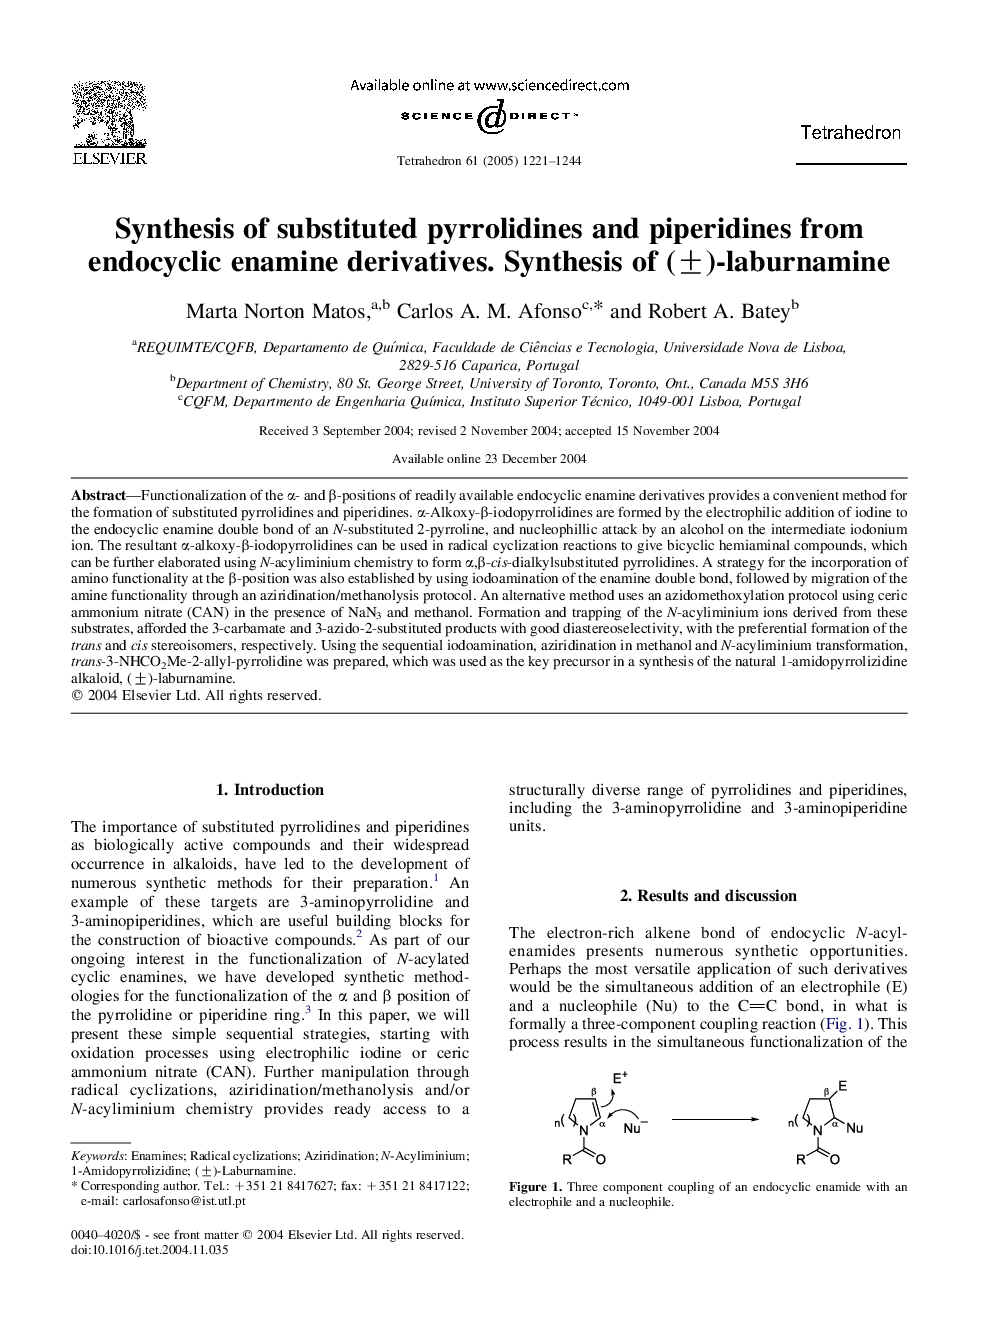 Synthesis of substituted pyrrolidines and piperidines from endocyclic enamine derivatives. Synthesis of (Â±)-laburnamine